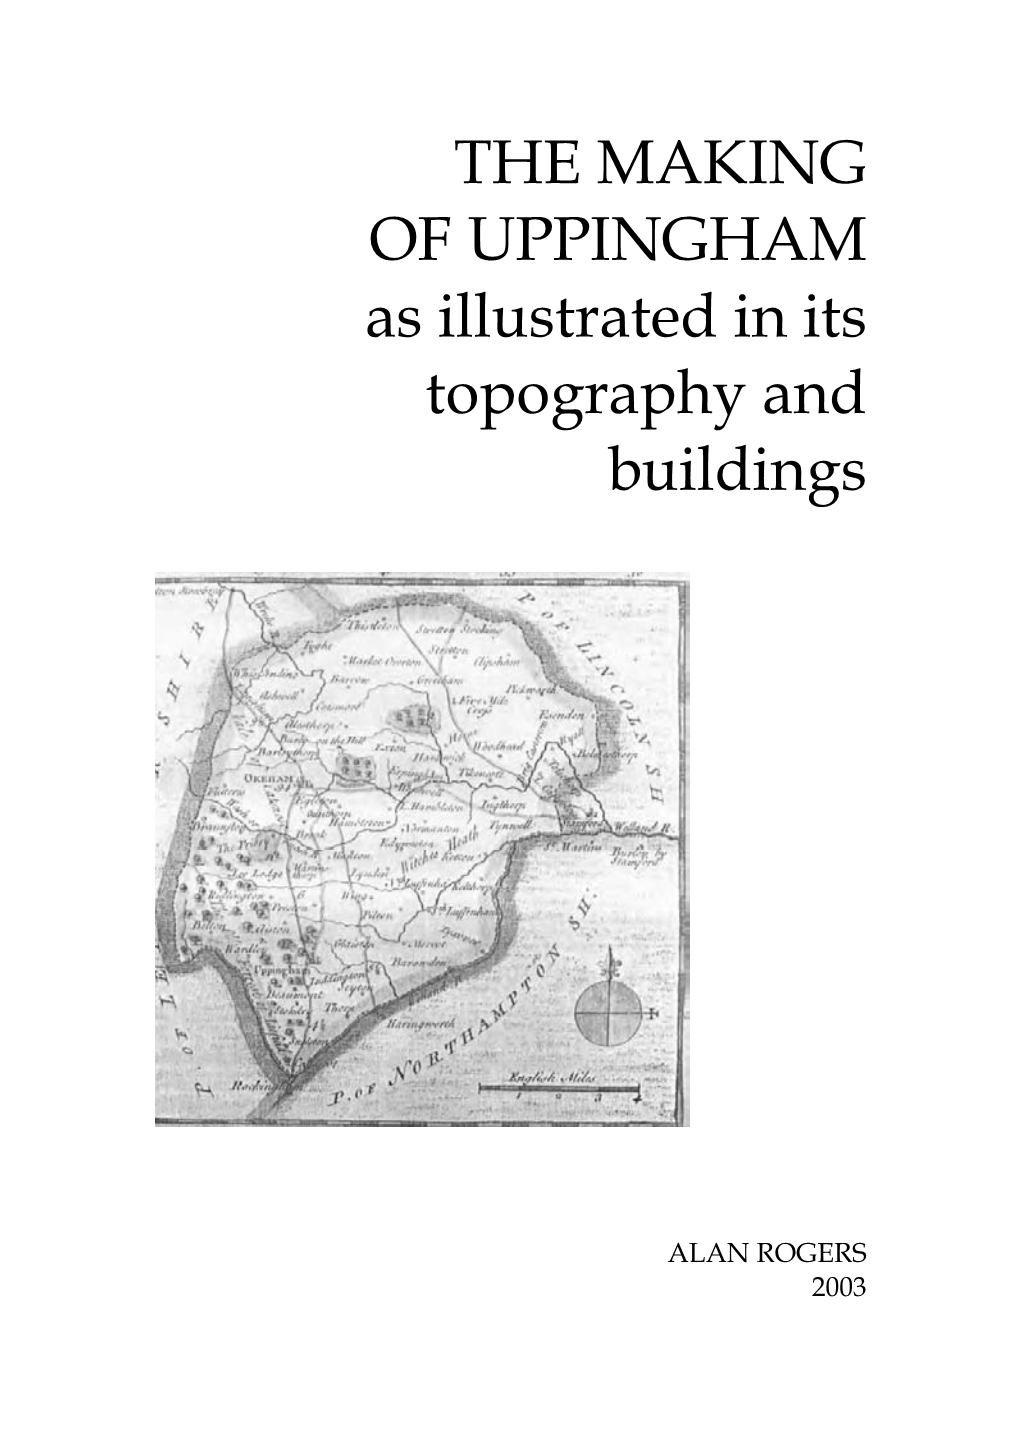 THE MAKING of UPPINGHAM As Illustrated in Its Topography and Buildings